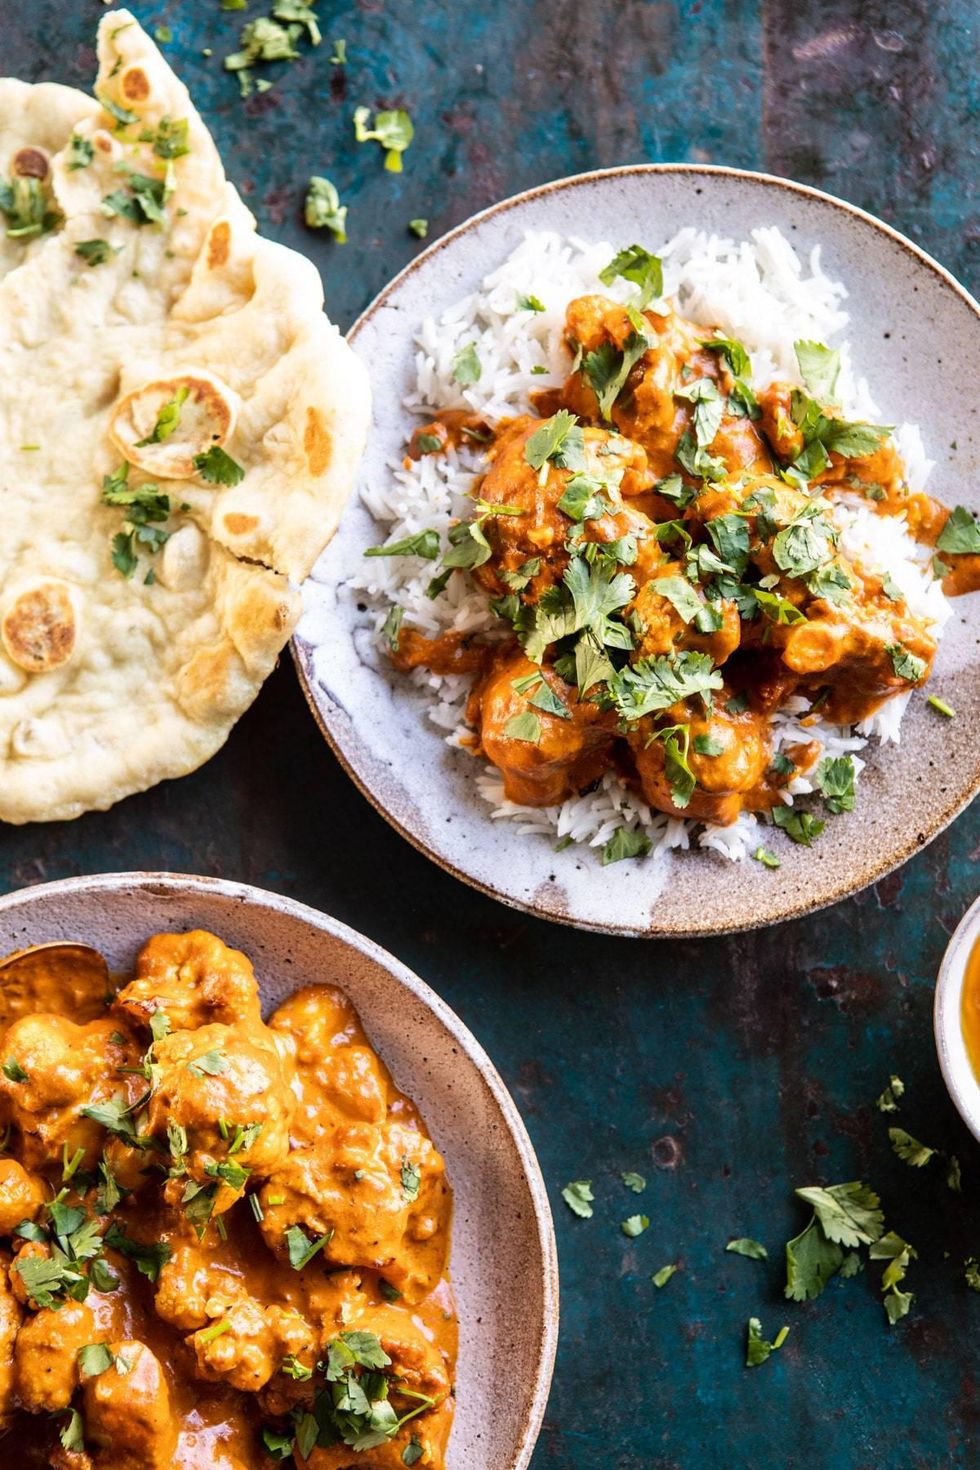 44 Indian Food Recipes To Make Amazing